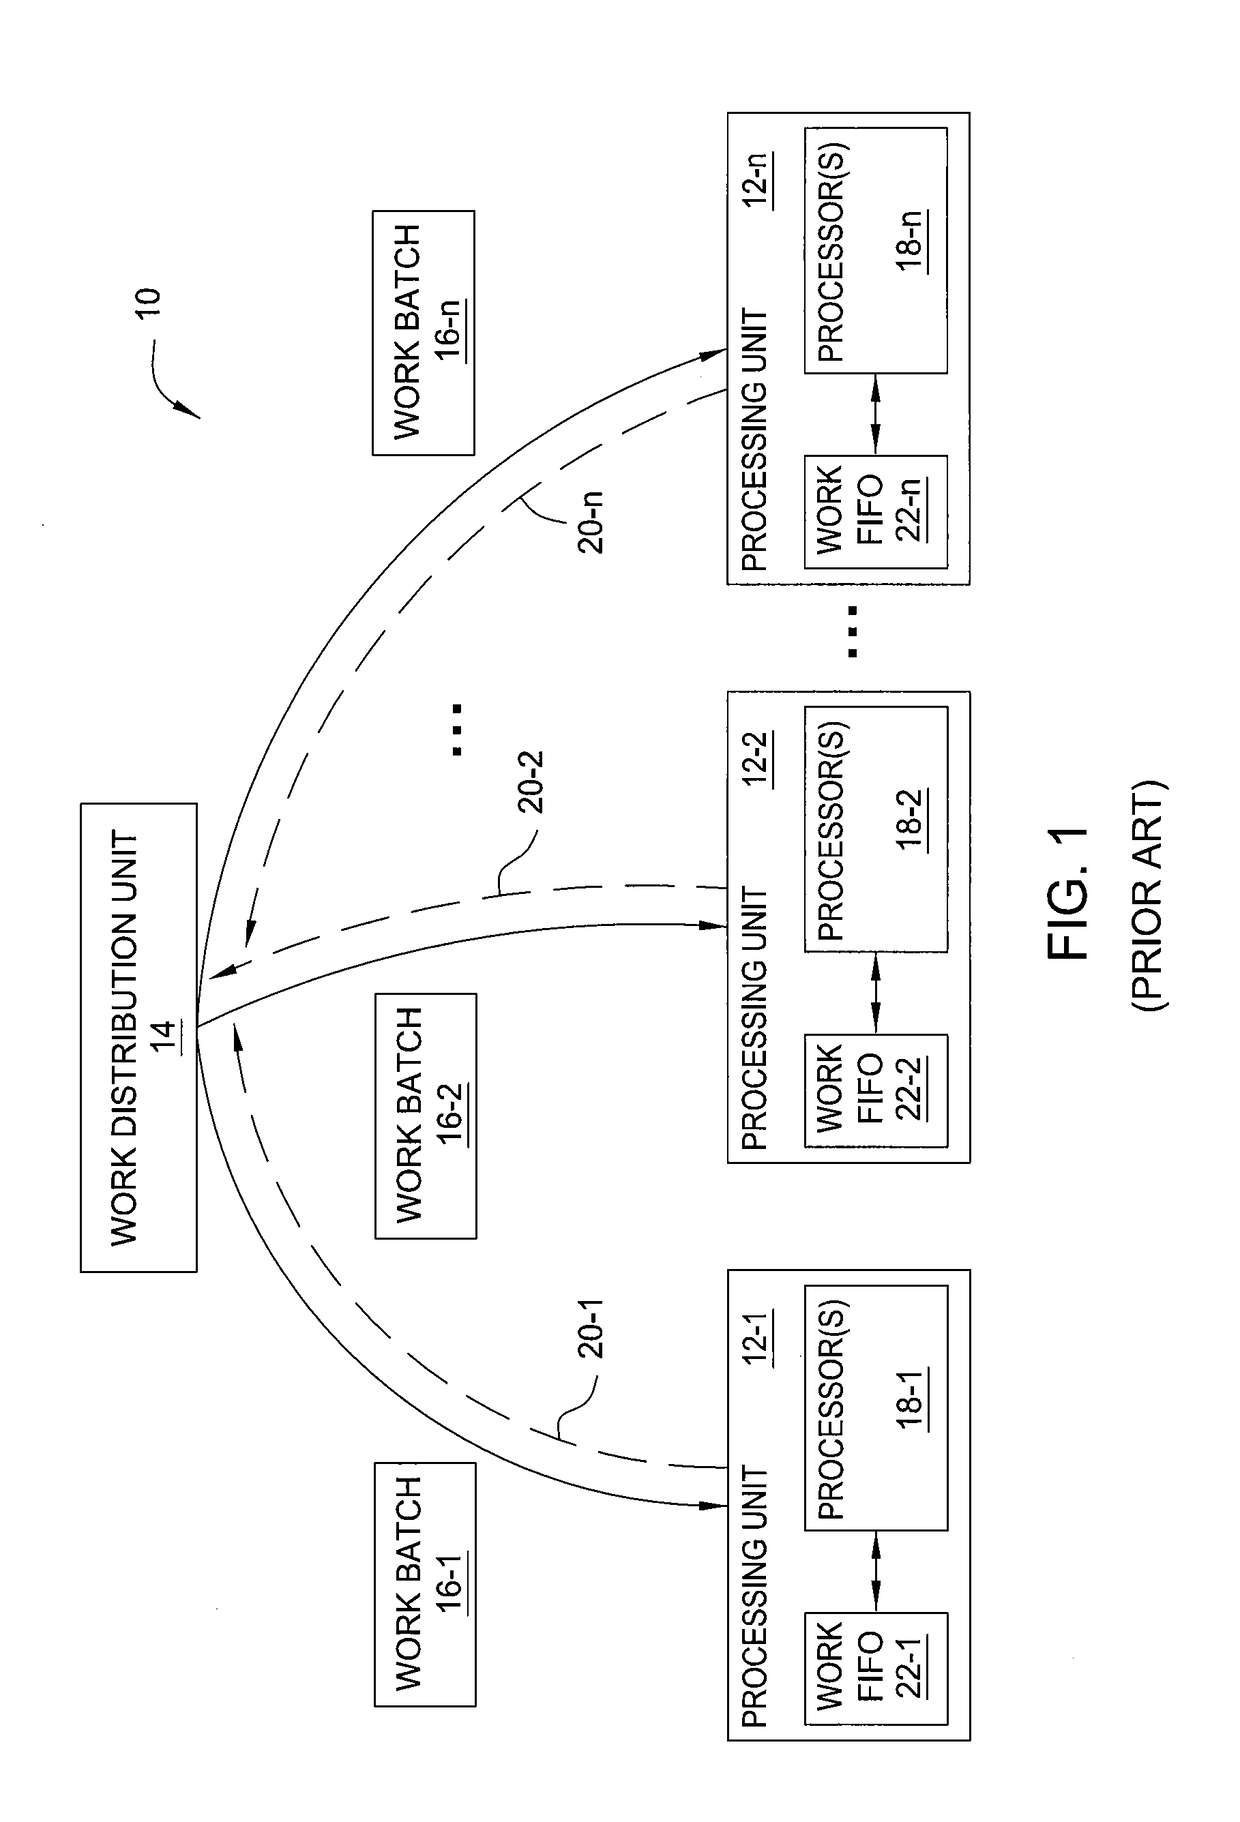 Method and system for distributing work batches to processing units based on a number of enabled streaming multiprocessors